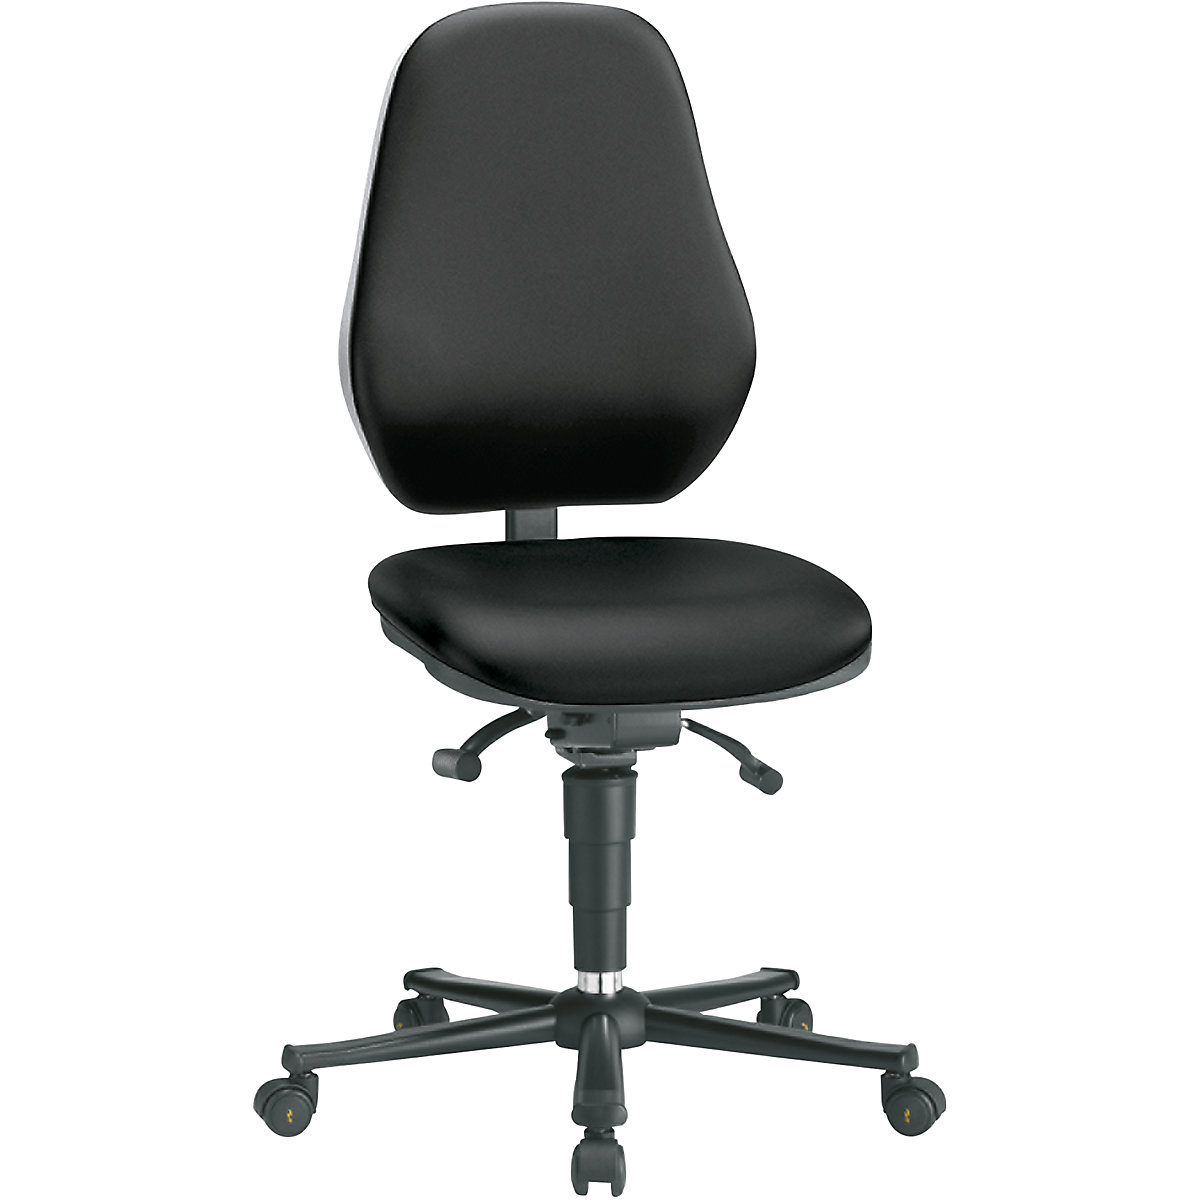 Industrial swivel chair – bimos, with ESD protection, with synchronous mechanism and weight adjustment, with castors, black vinyl covering-14